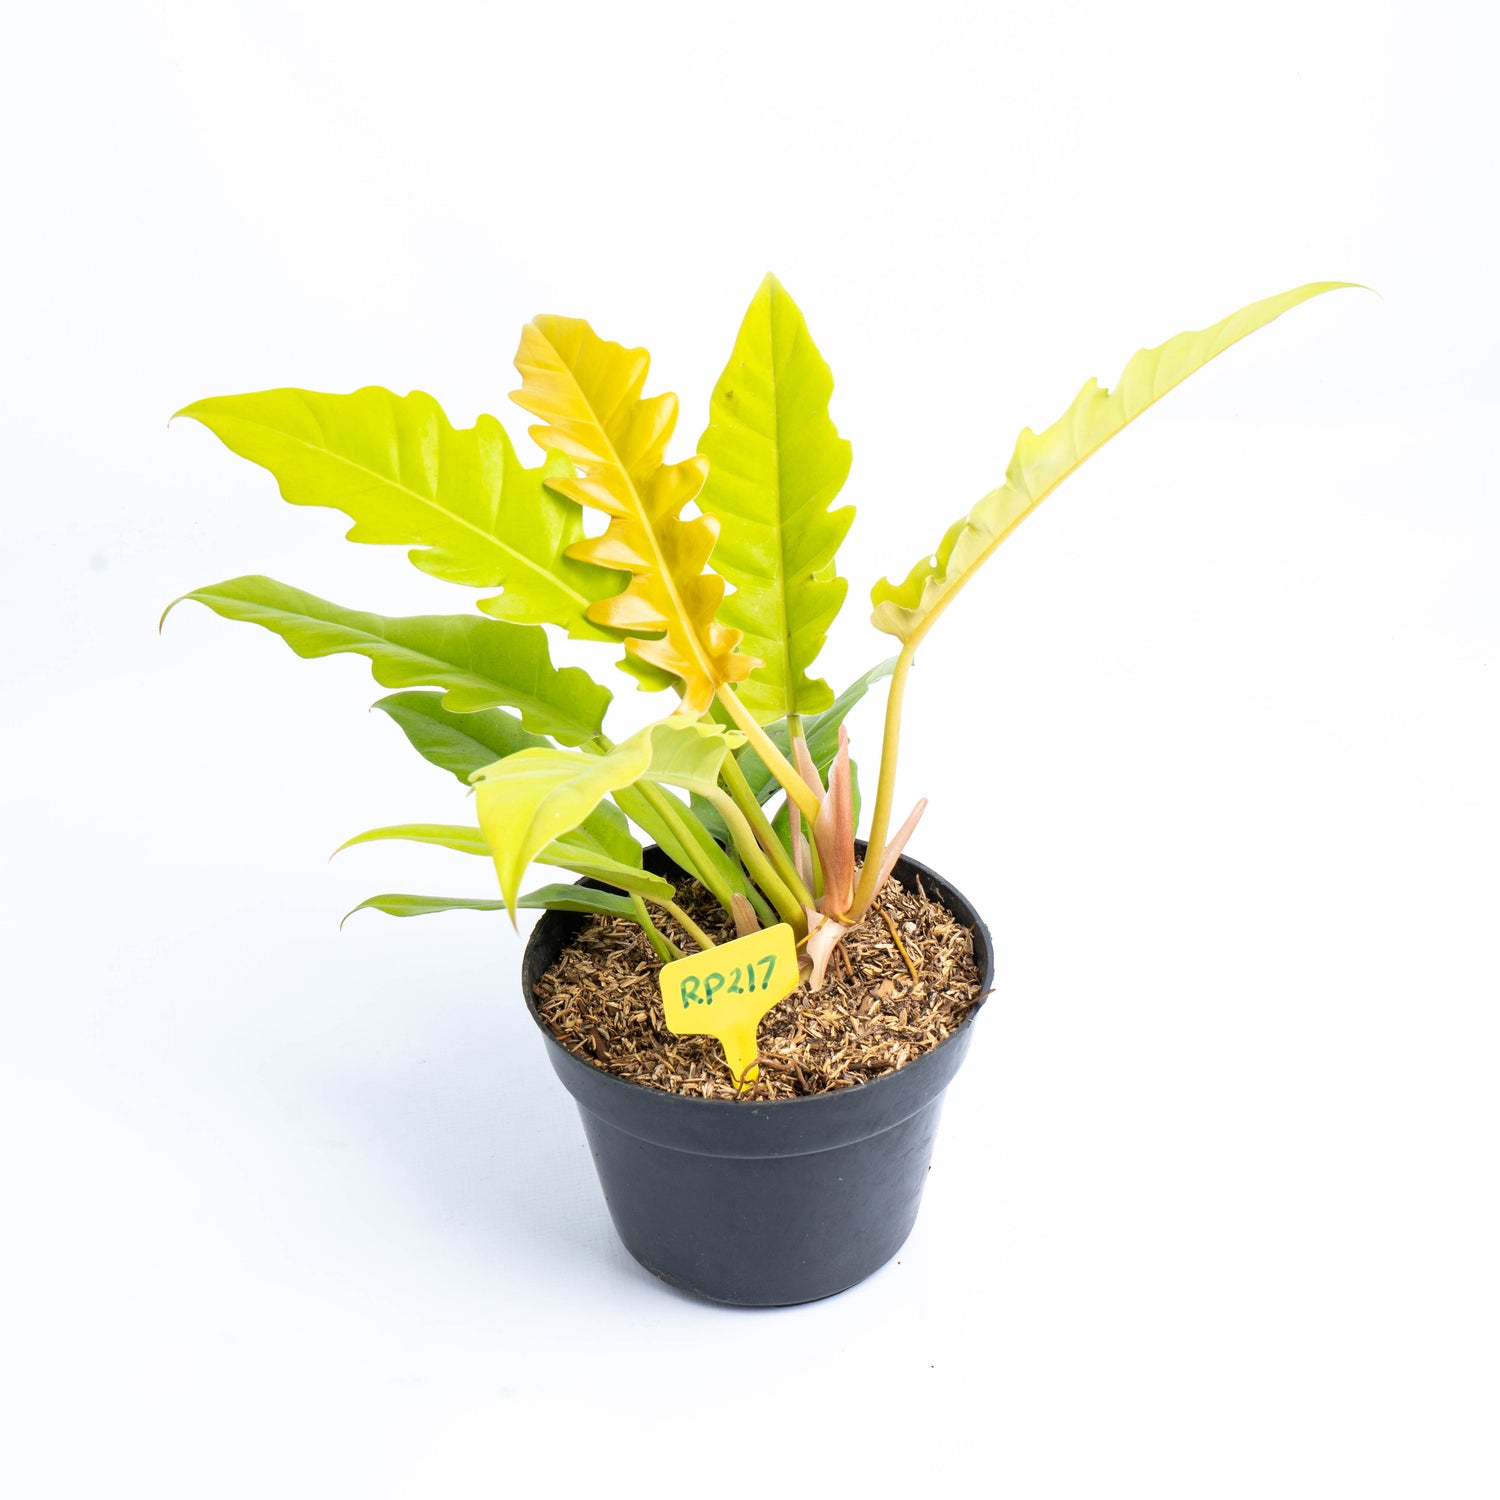 RP217 Philodendron Golden Saw